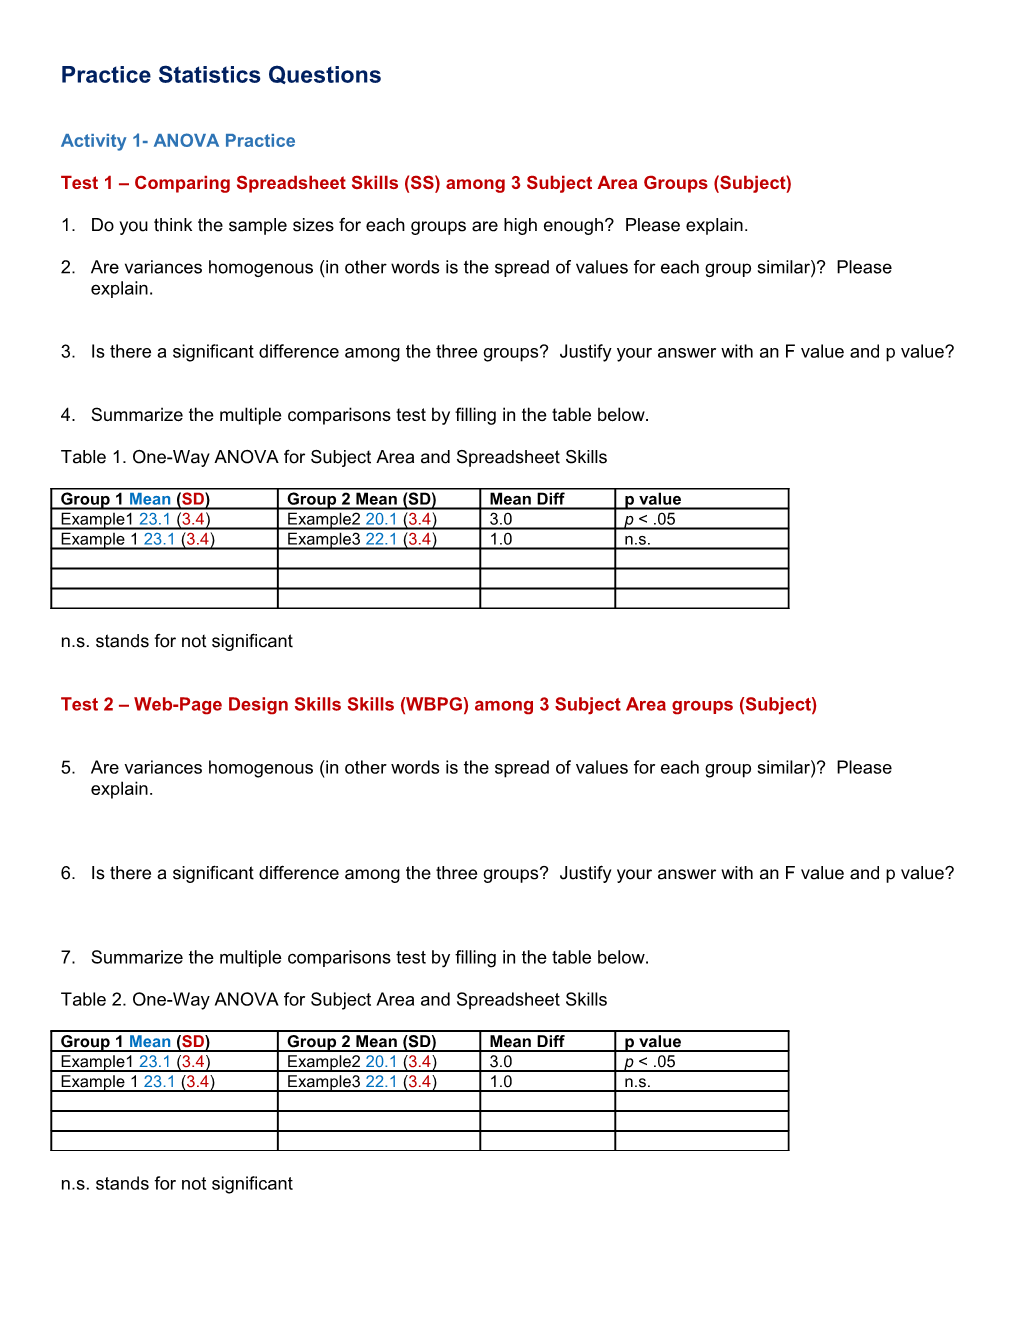 Test 1 Comparing Spreadsheet Skills (SS) Among 3 Subject Area Groups (Subject)